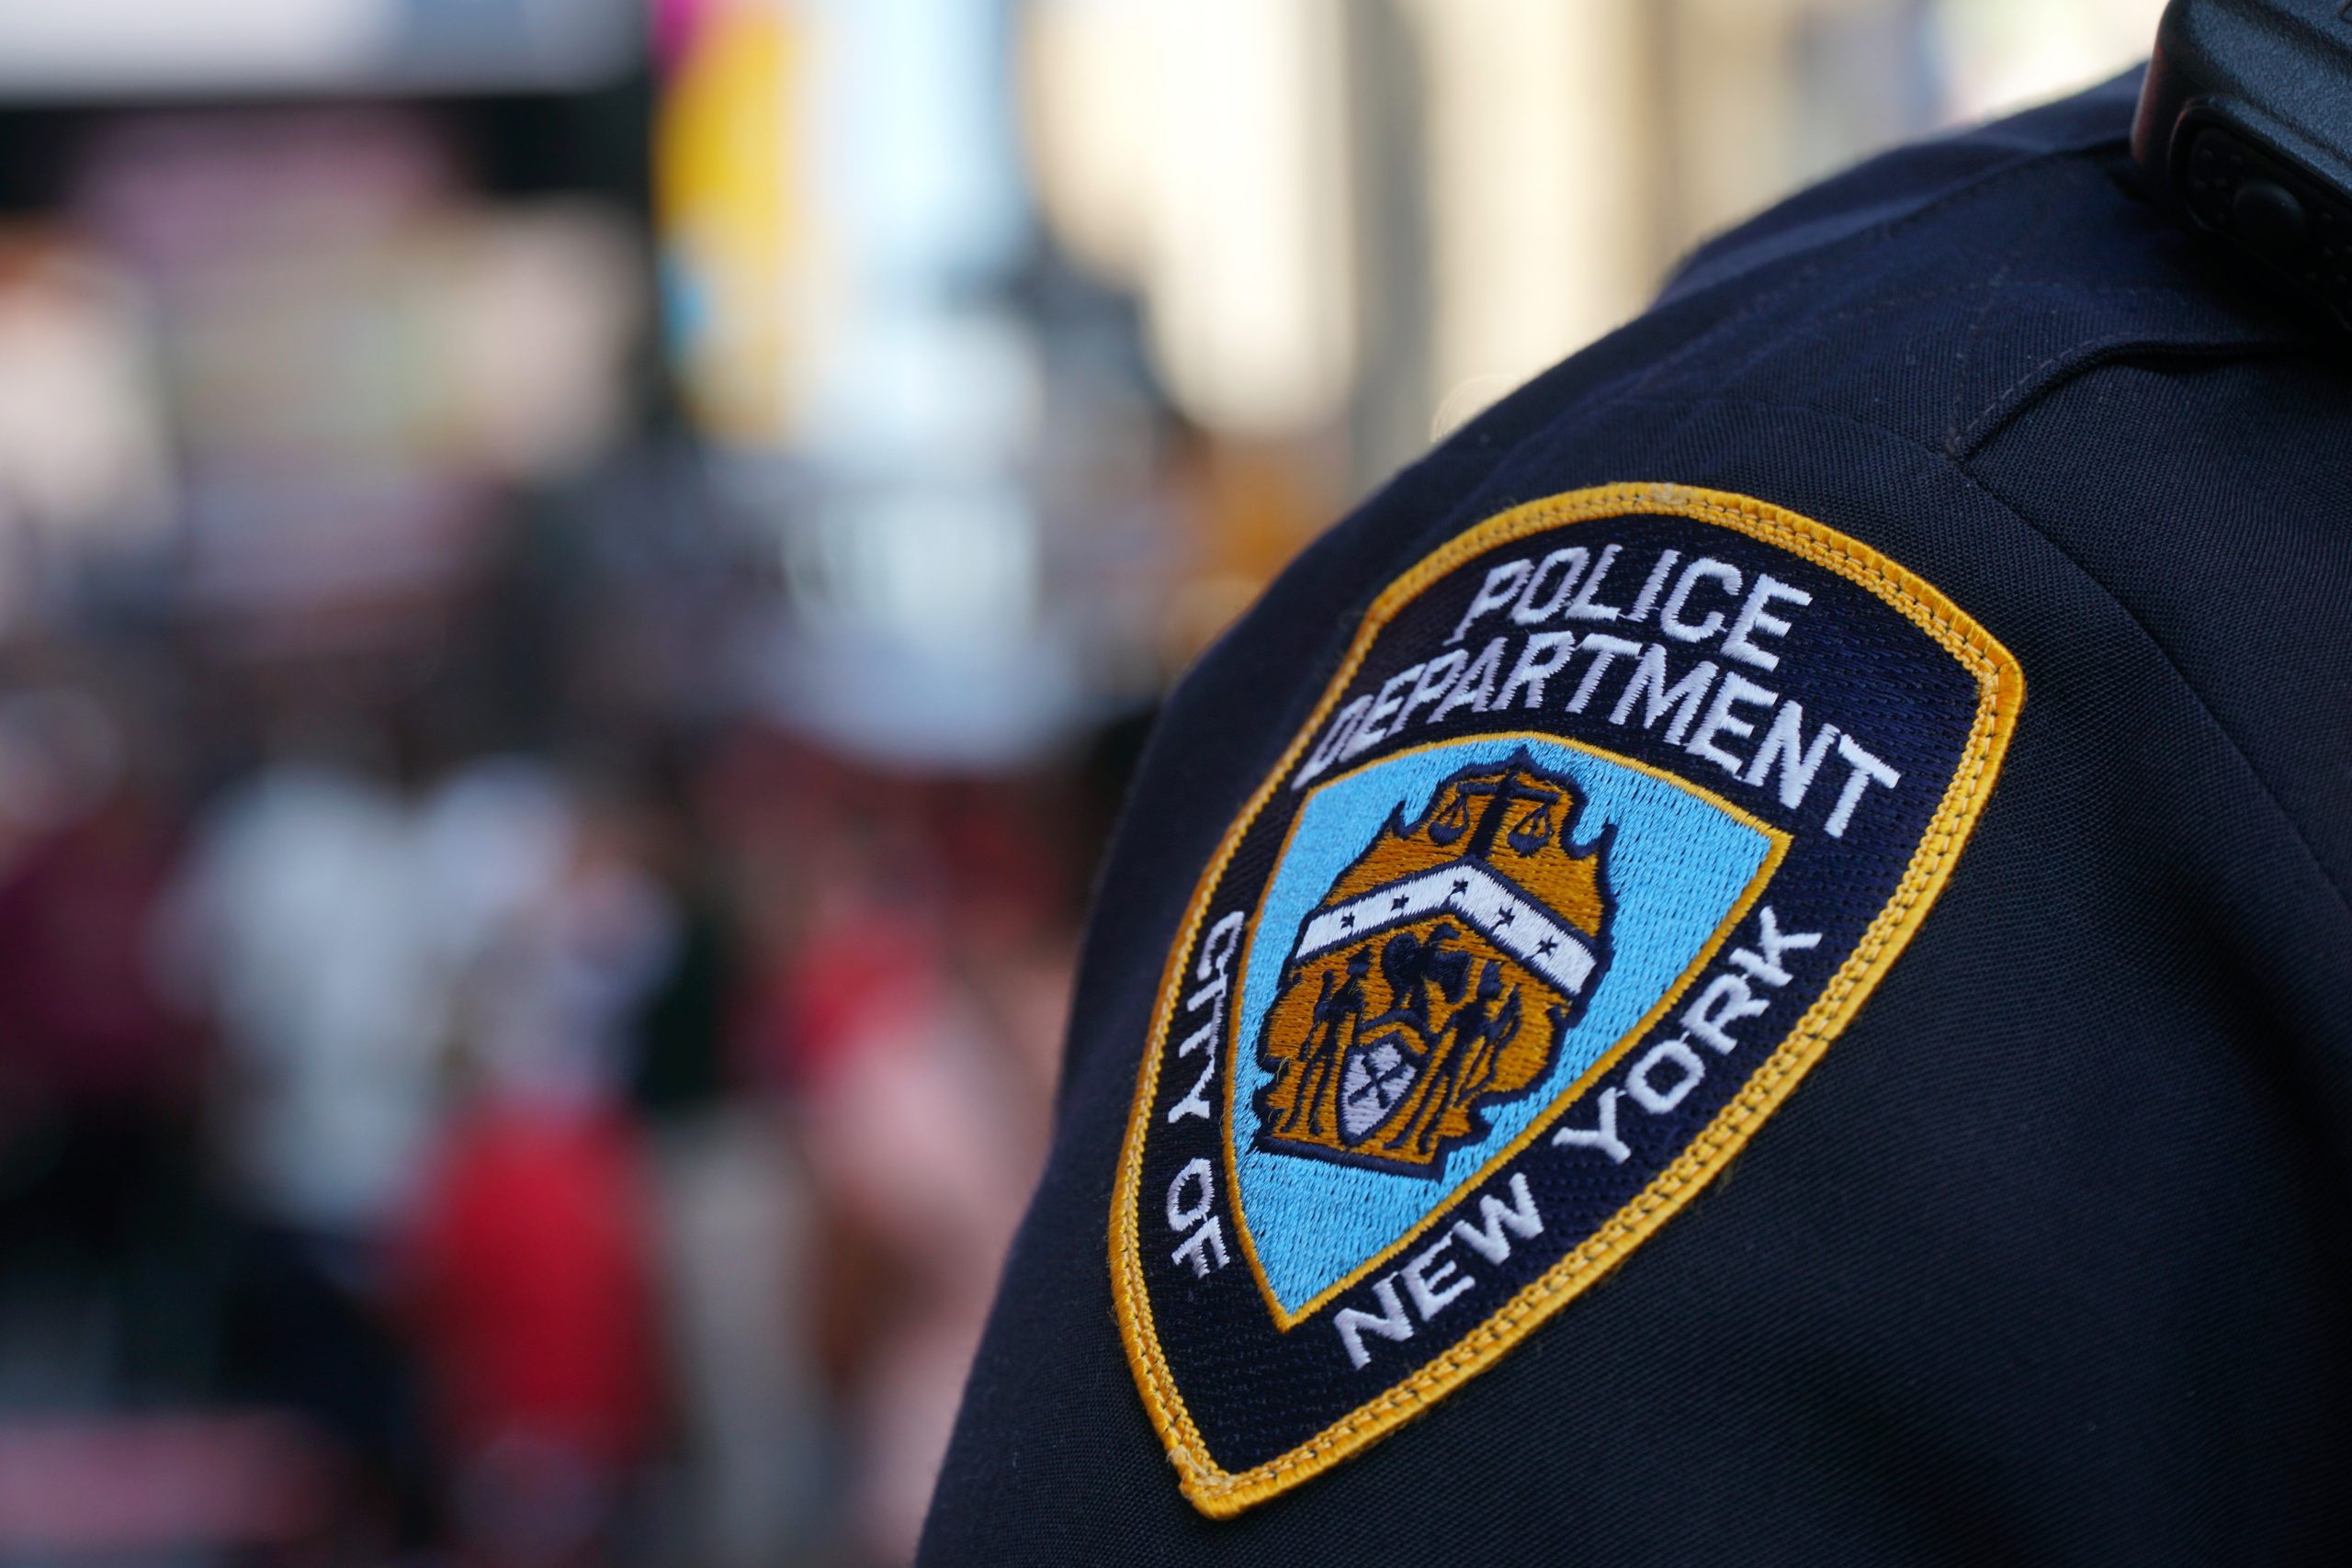 Image of the NYPD badge